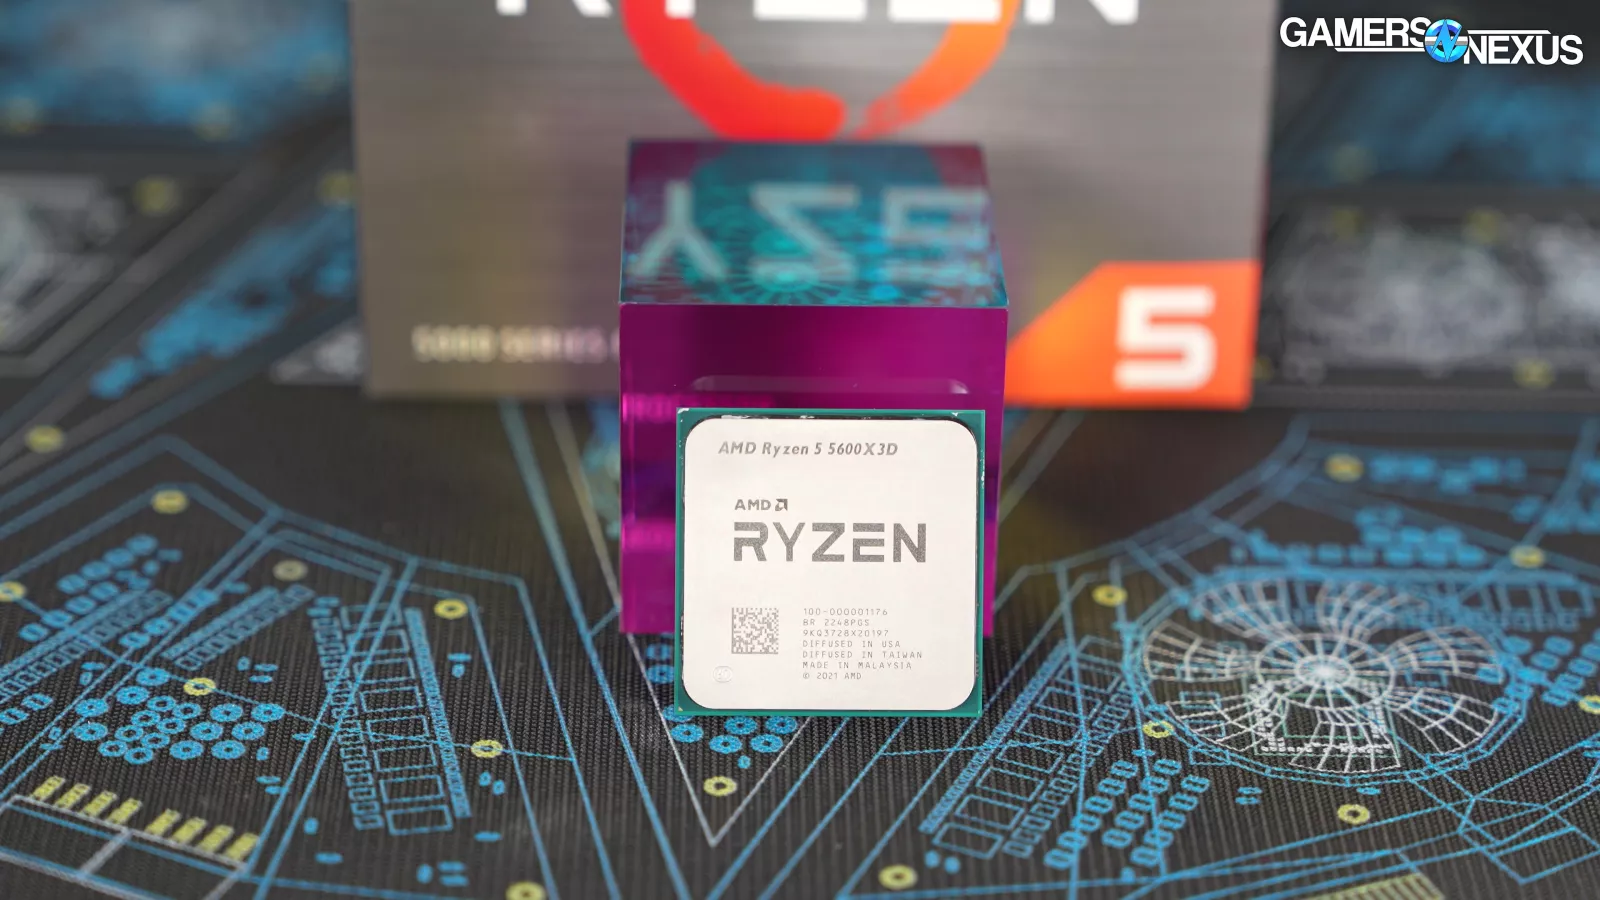 Upgrading to Ryzen 5 5600 from Ryzen 5 1600: How Much Faster